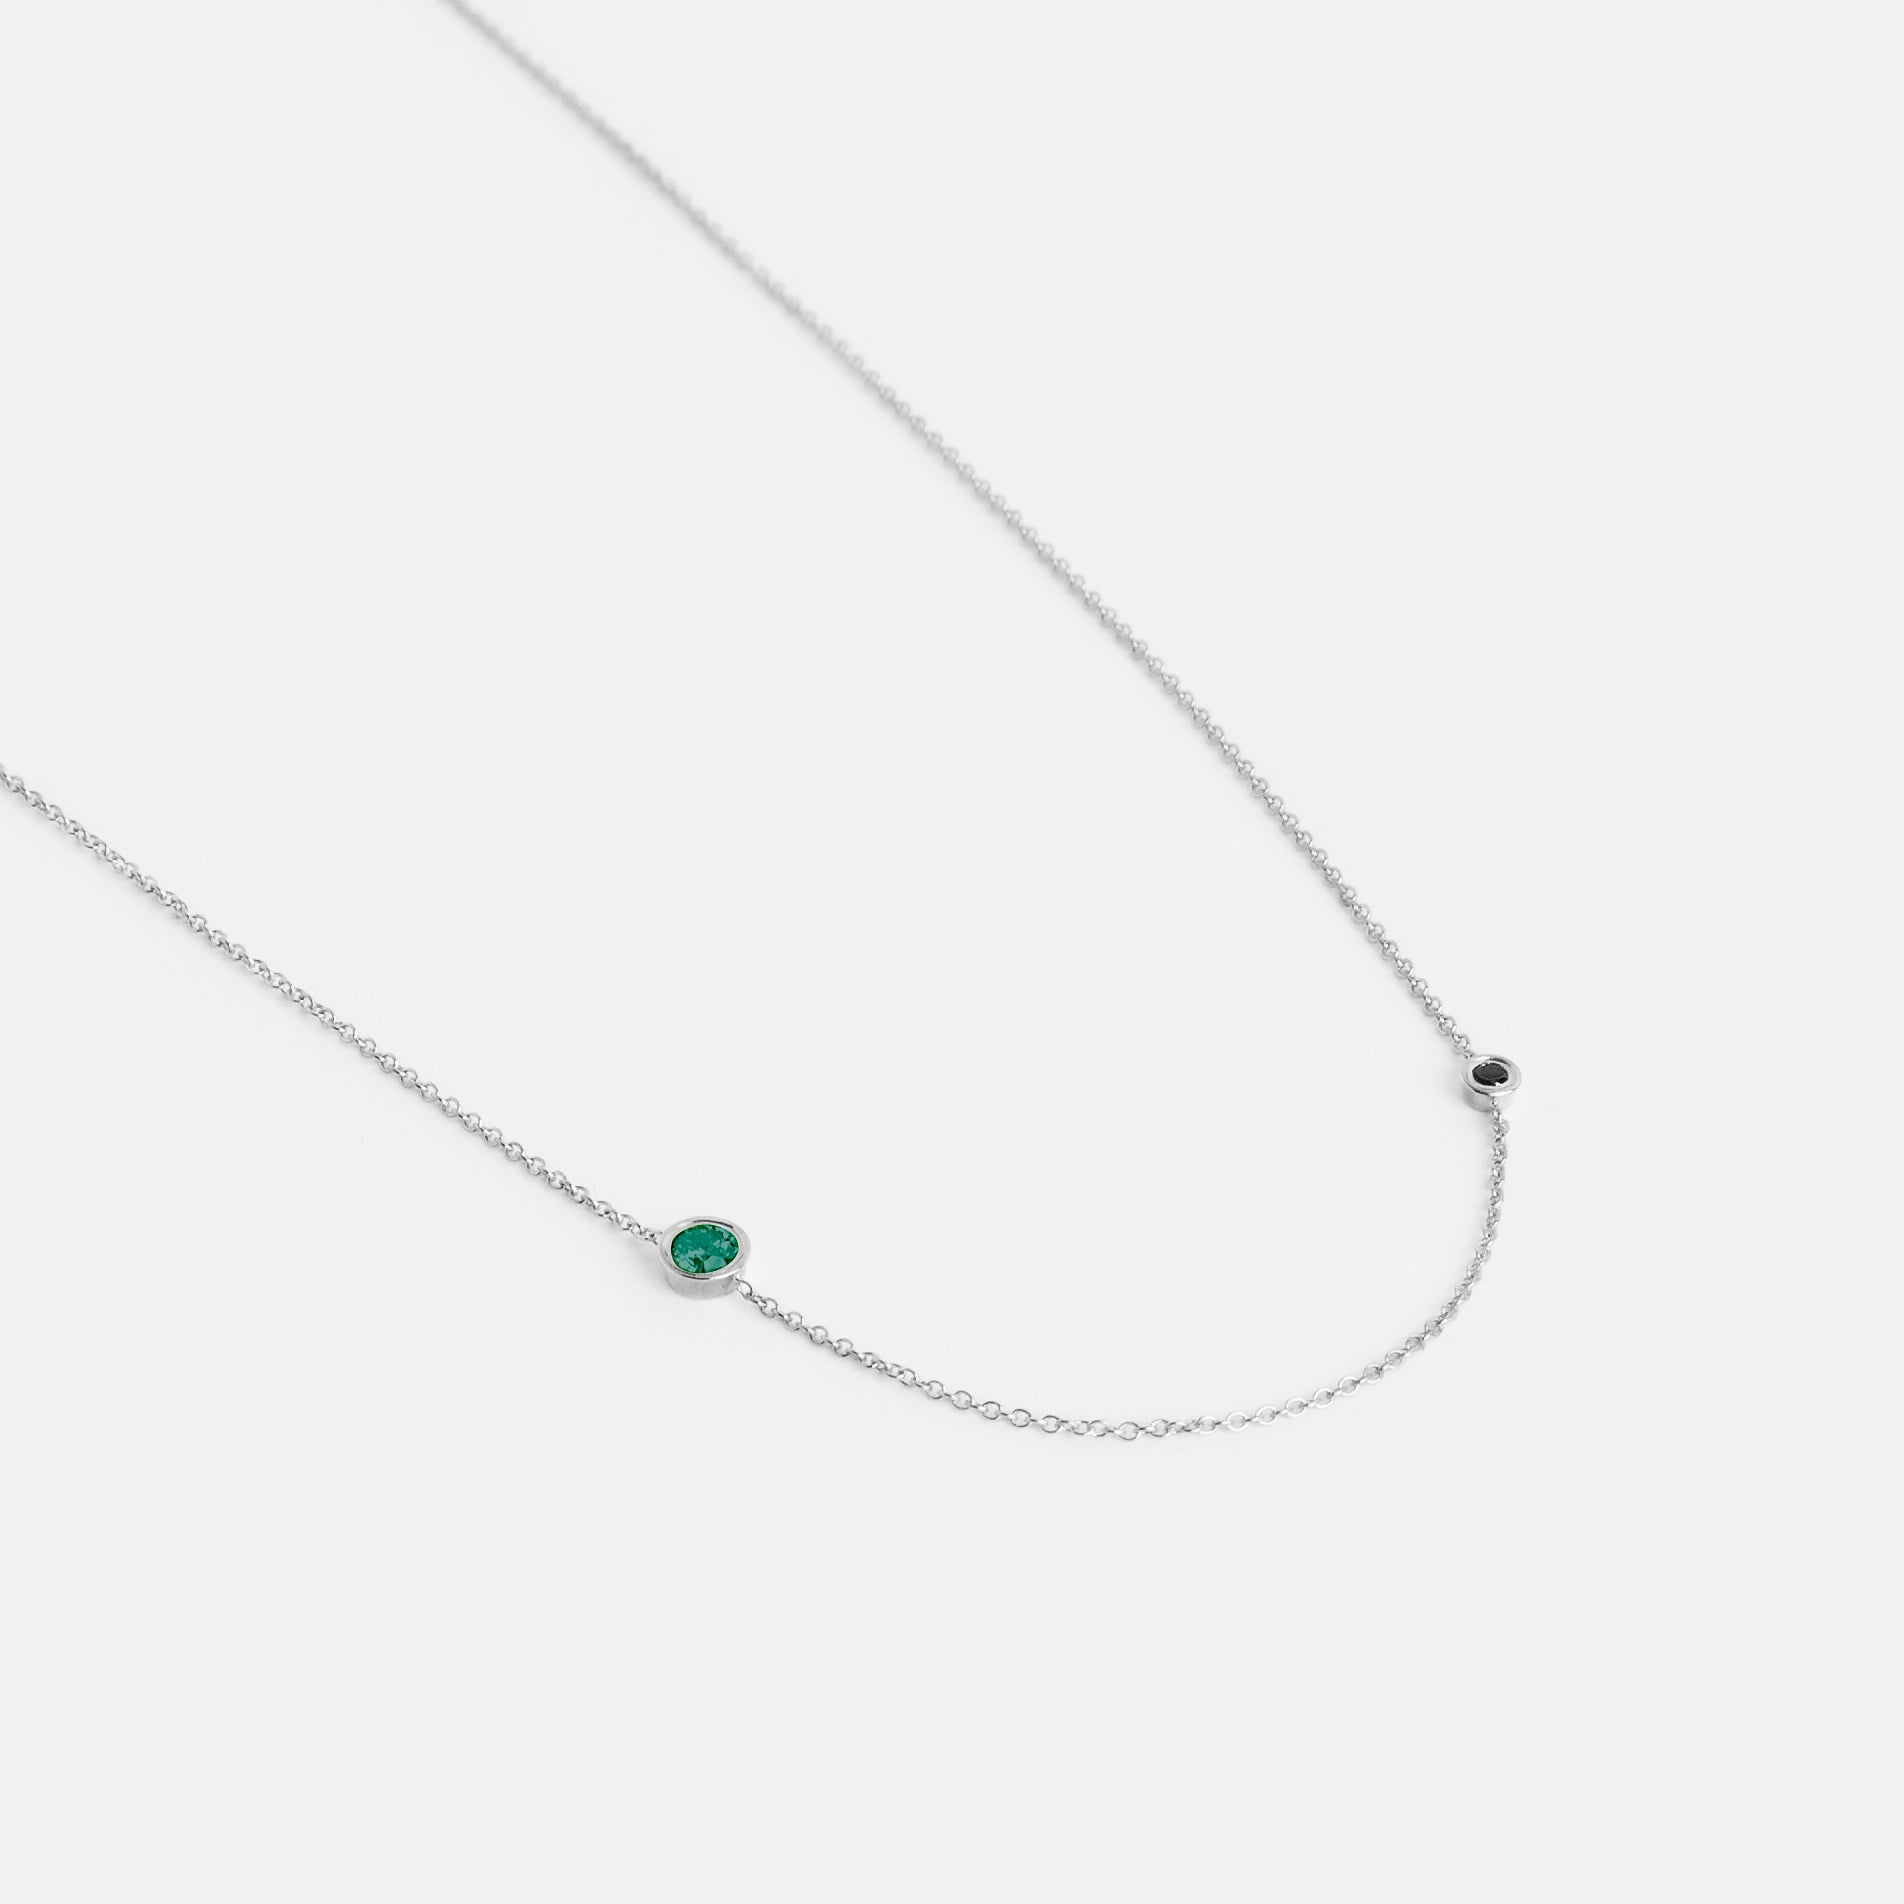 Iba Minimalist Necklace in 14k White Gold set with Black Diamond and Emerald By SHW Fine Jewelry NYC